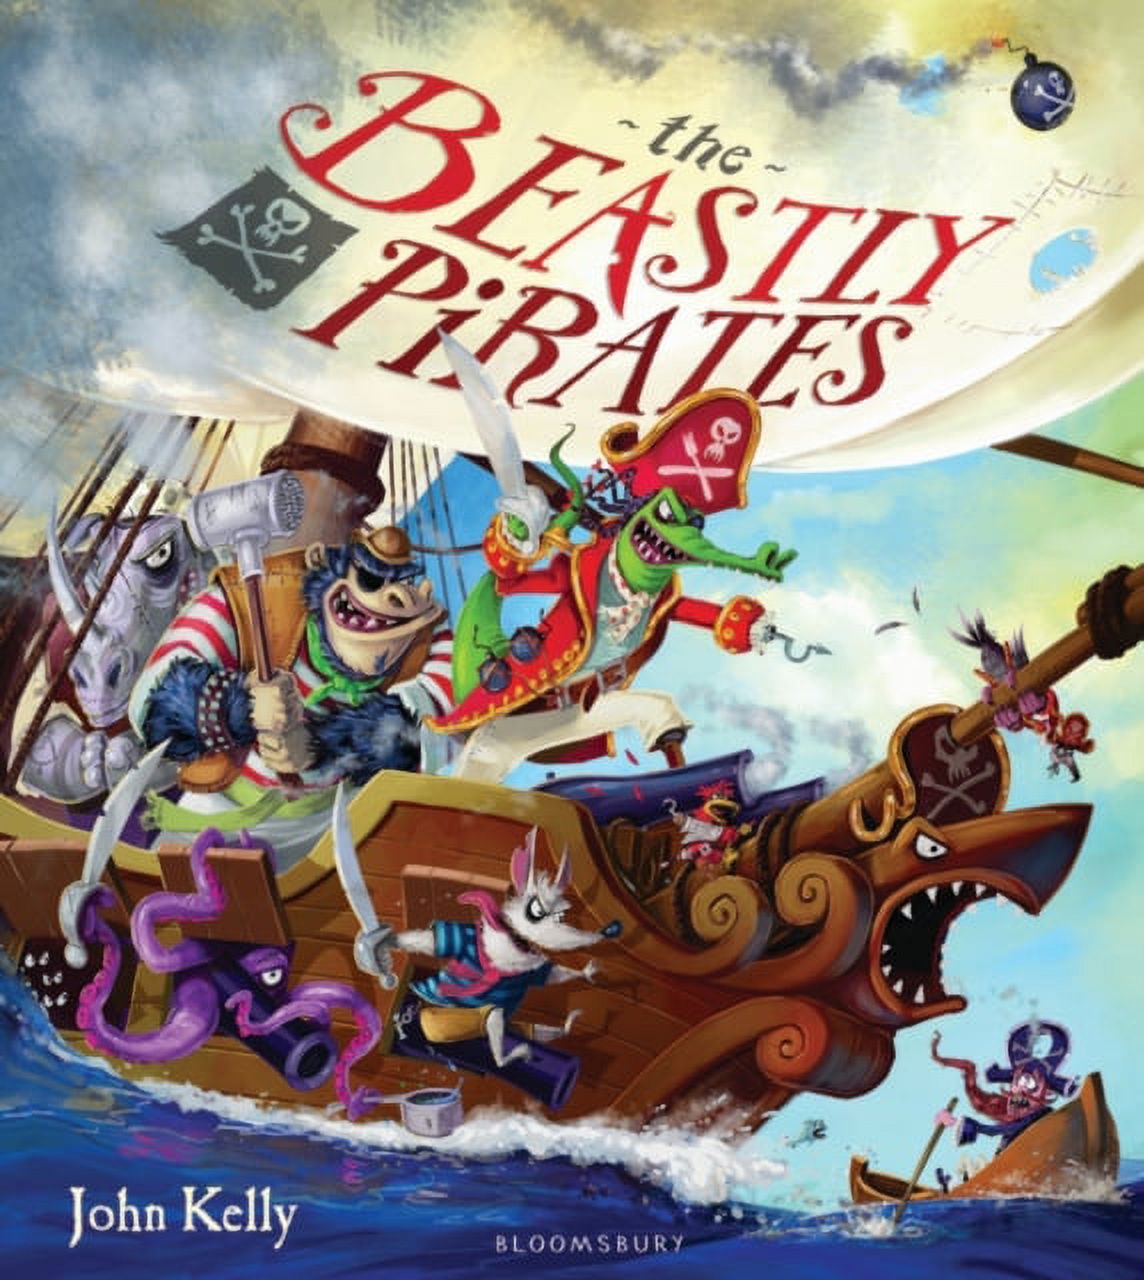 The Beastly Pirates (Paperback) - image 1 of 1